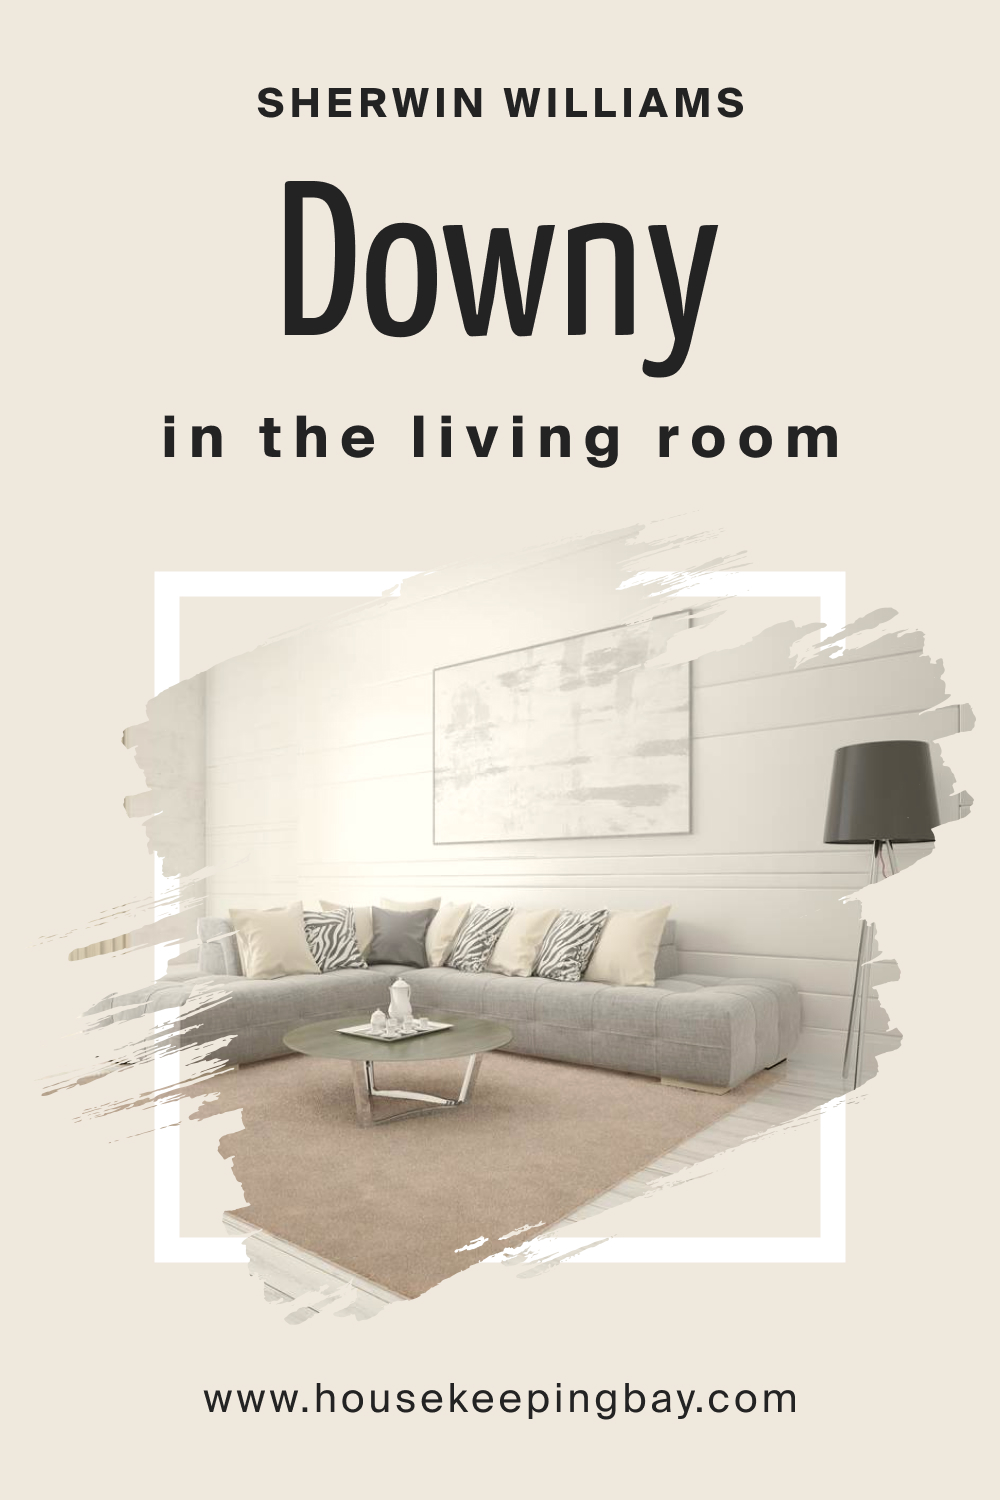 Sherwin Williams. SW Downy In the Living Room